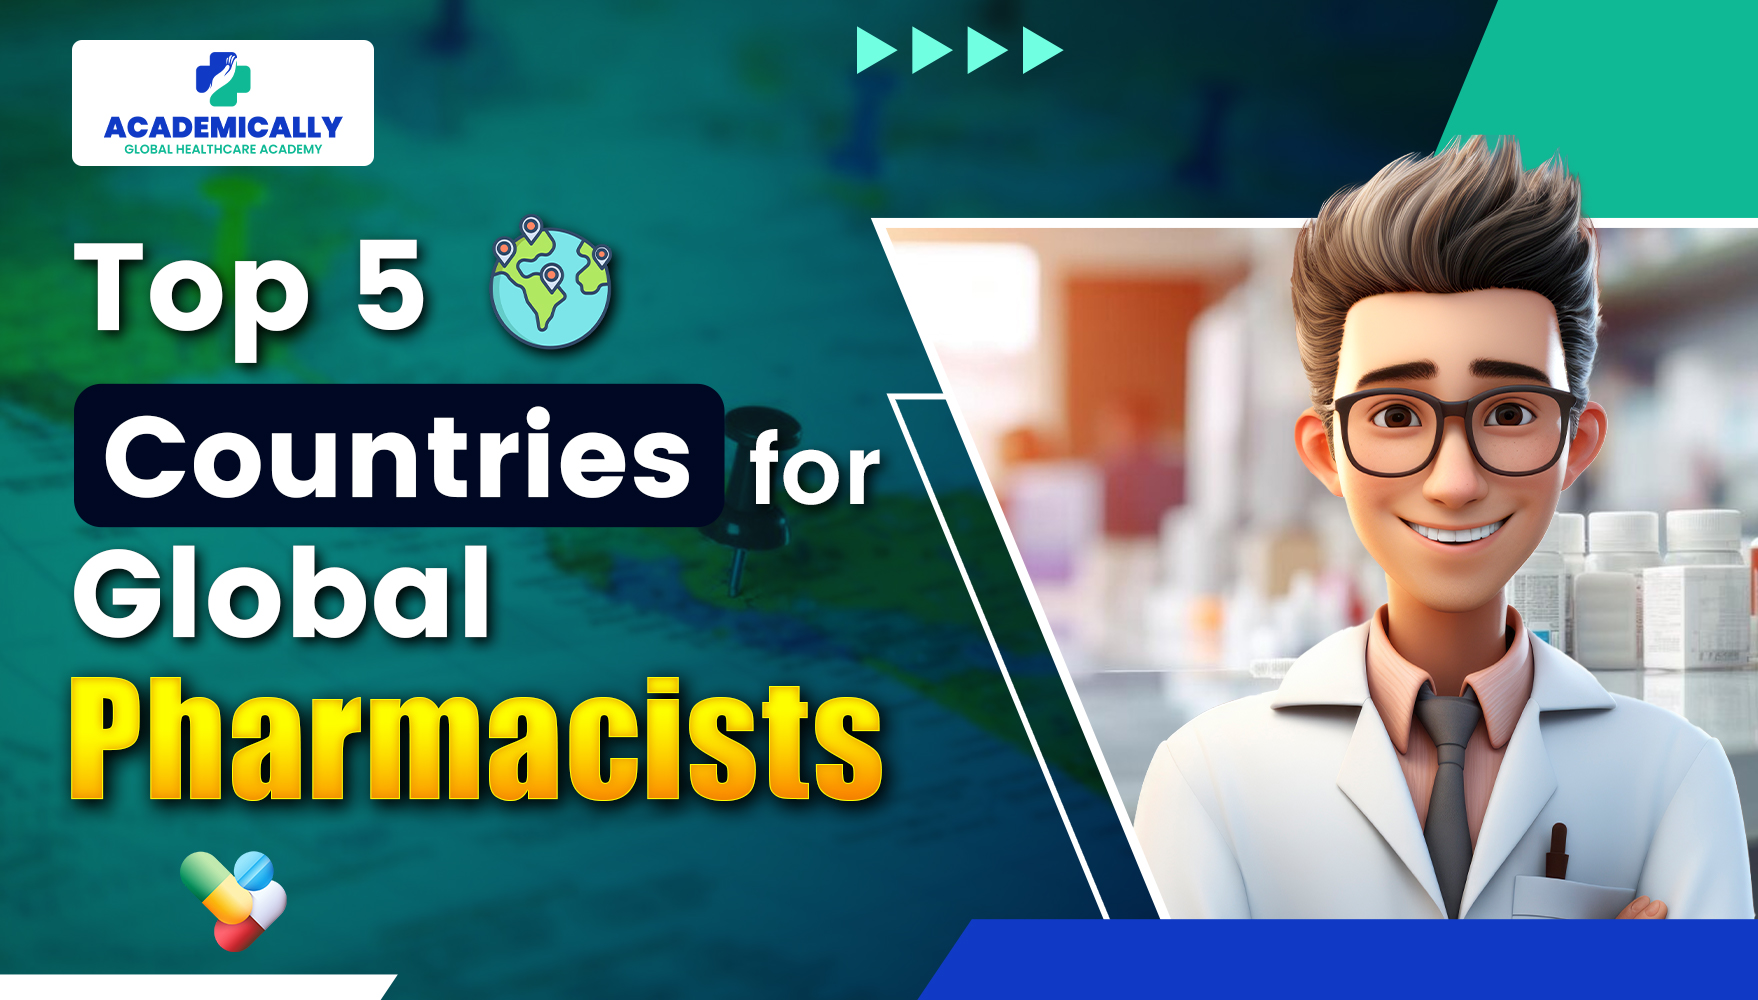 Top 5 Countries for Pharmacists